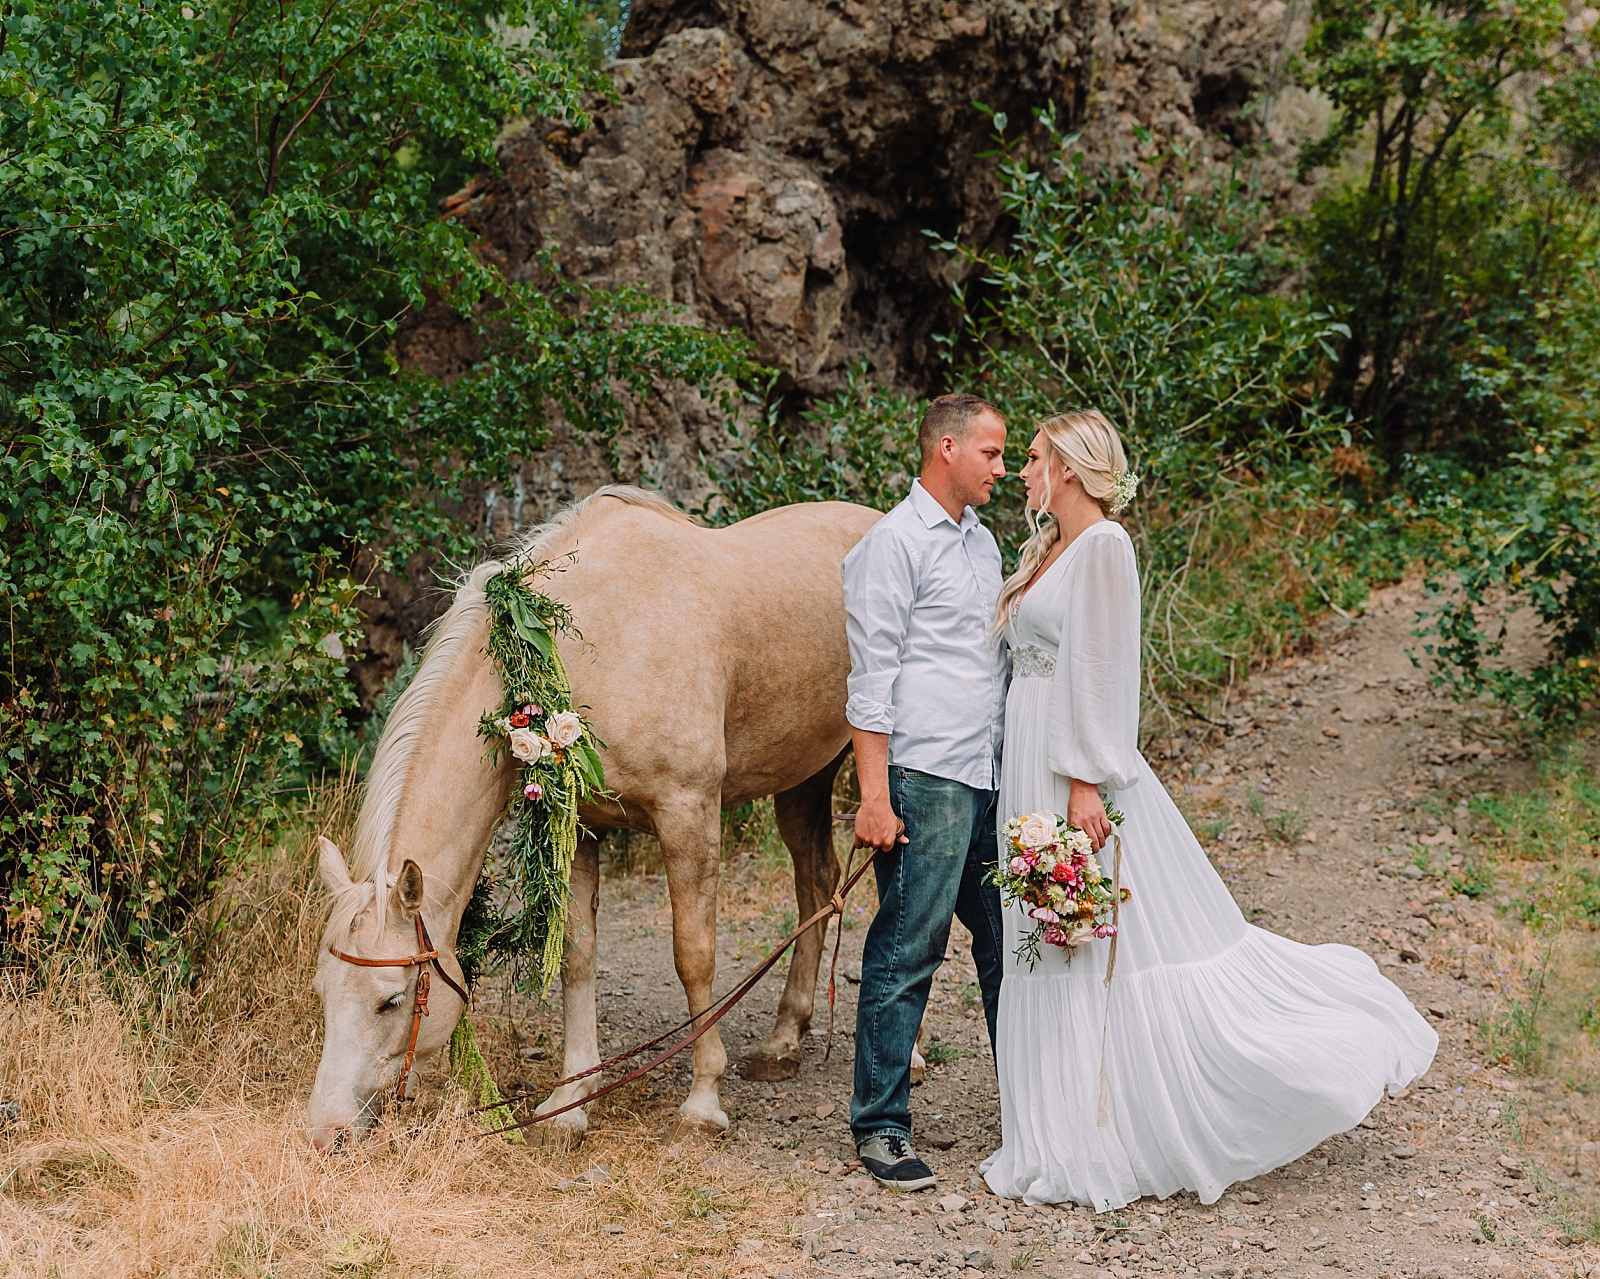 styled elopement in kelly canyon with horse and boho chic vibes